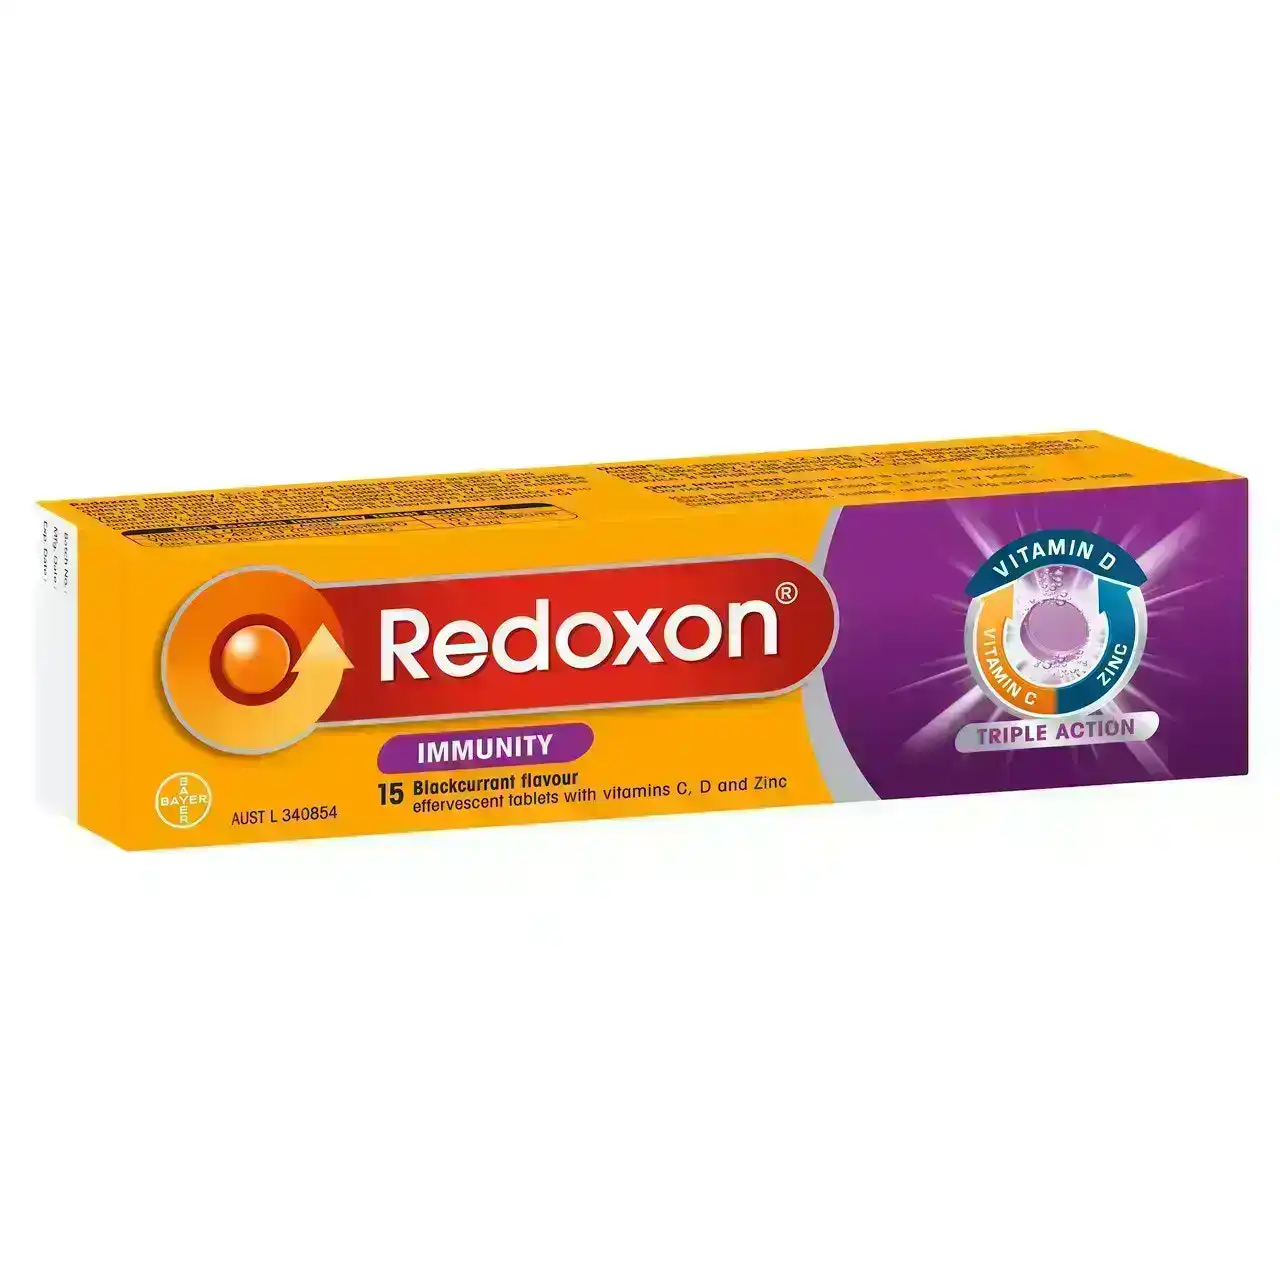 Redoxon Immunity Vitamin C, D and Zinc Blackcurrant Flavoured Effervescent Tablets 15 pack